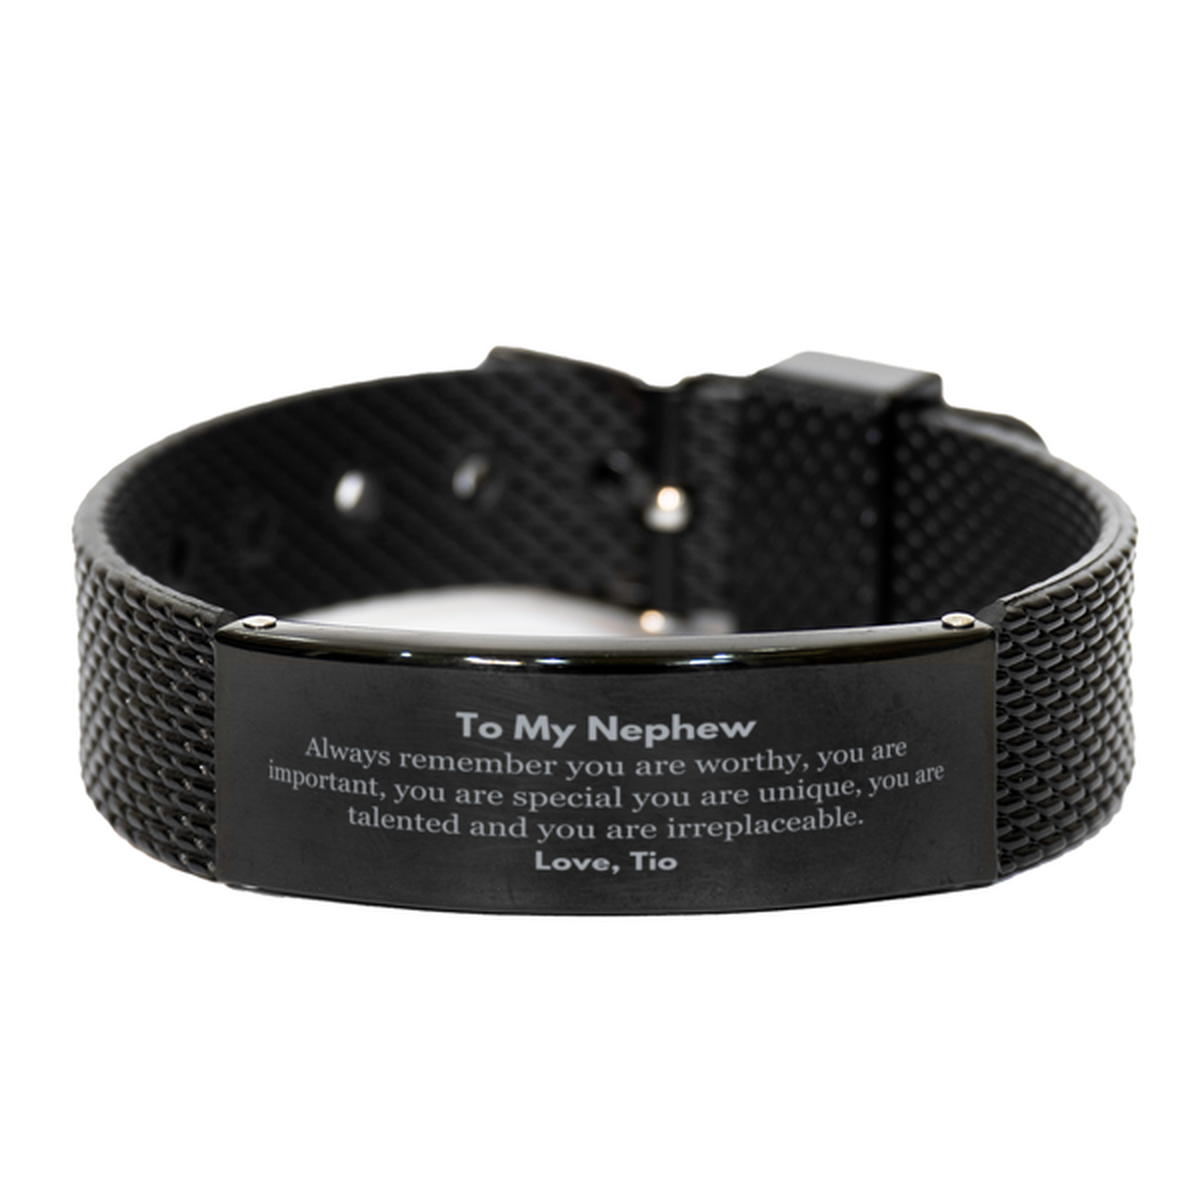 Nephew Birthday Gifts from Tio, Inspirational Black Shark Mesh Bracelet for Nephew Christmas Graduation Gifts for Nephew Always remember you are worthy, you are important. Love, Tio